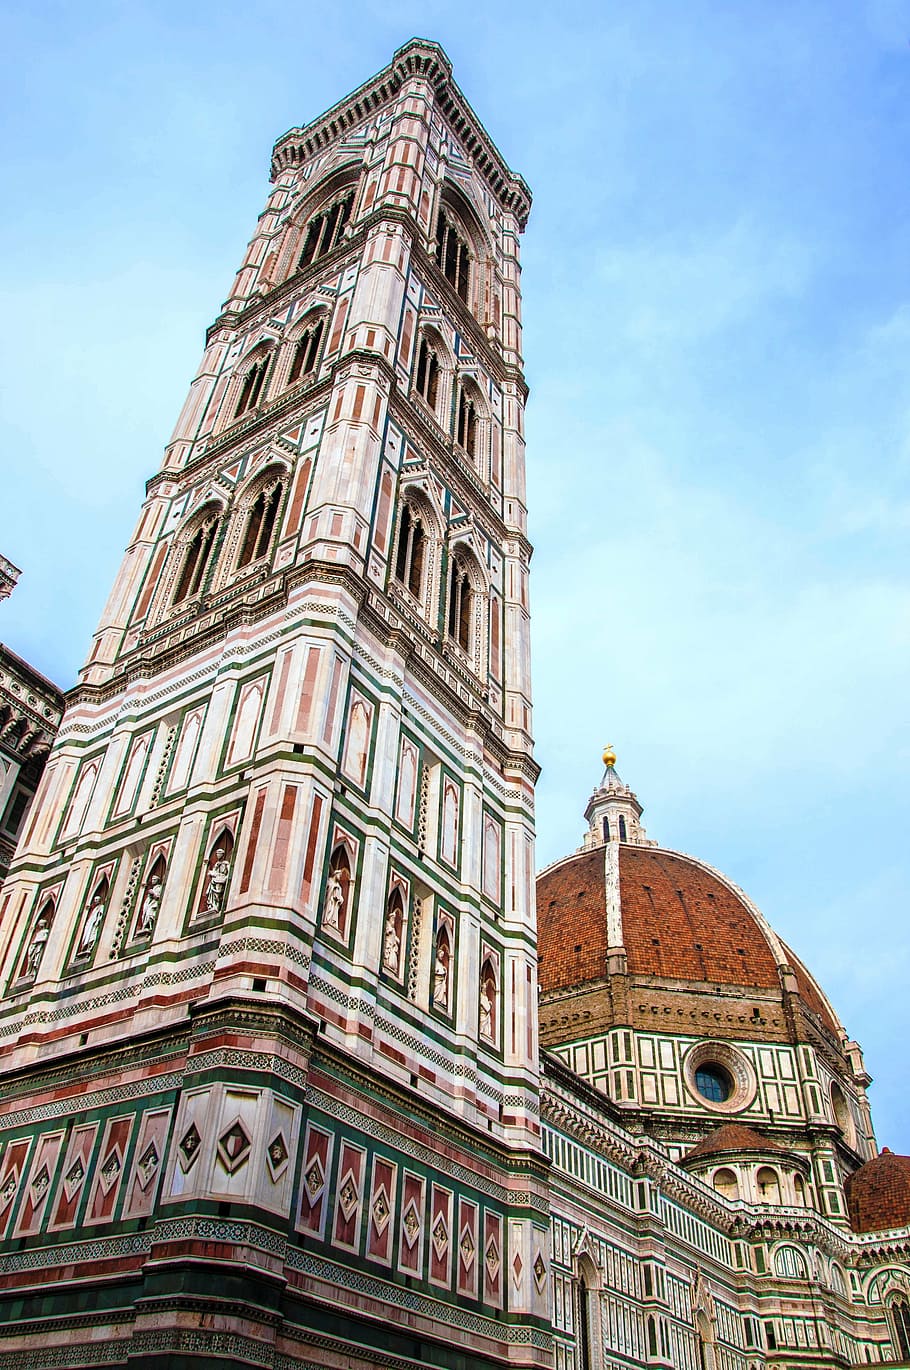 duomo, florence, art, monument, tuscany, italy, church, cathedral, architecture, florence - Italy